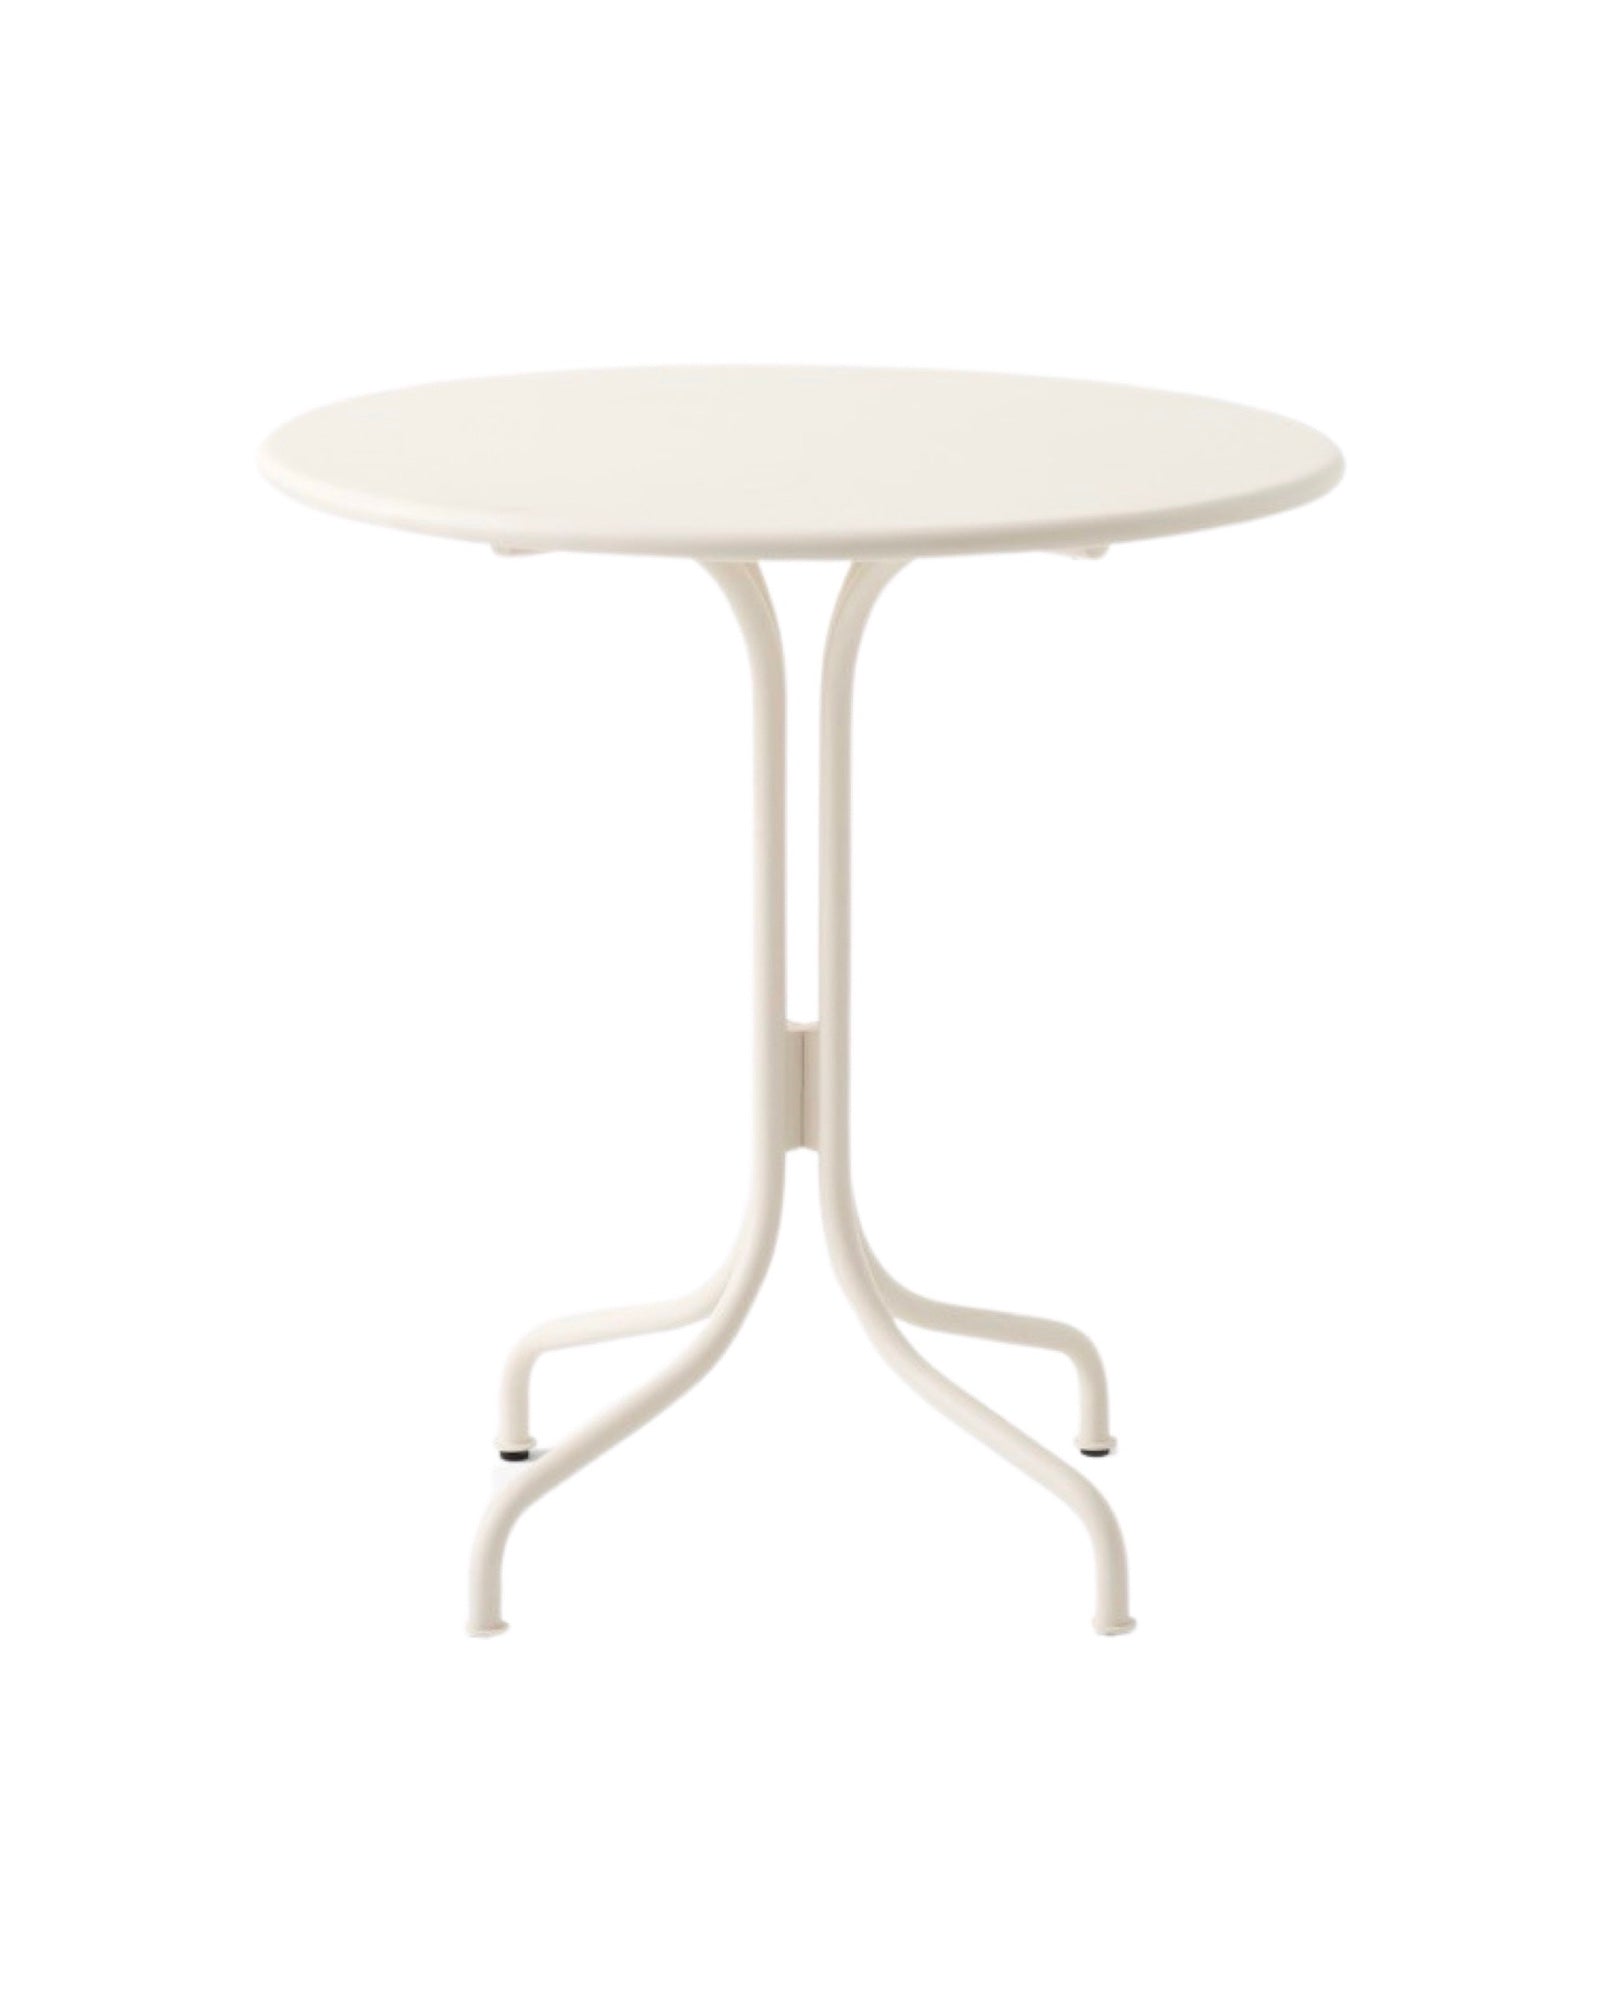 &Tradition Thorvald Round Cafe Table SC96